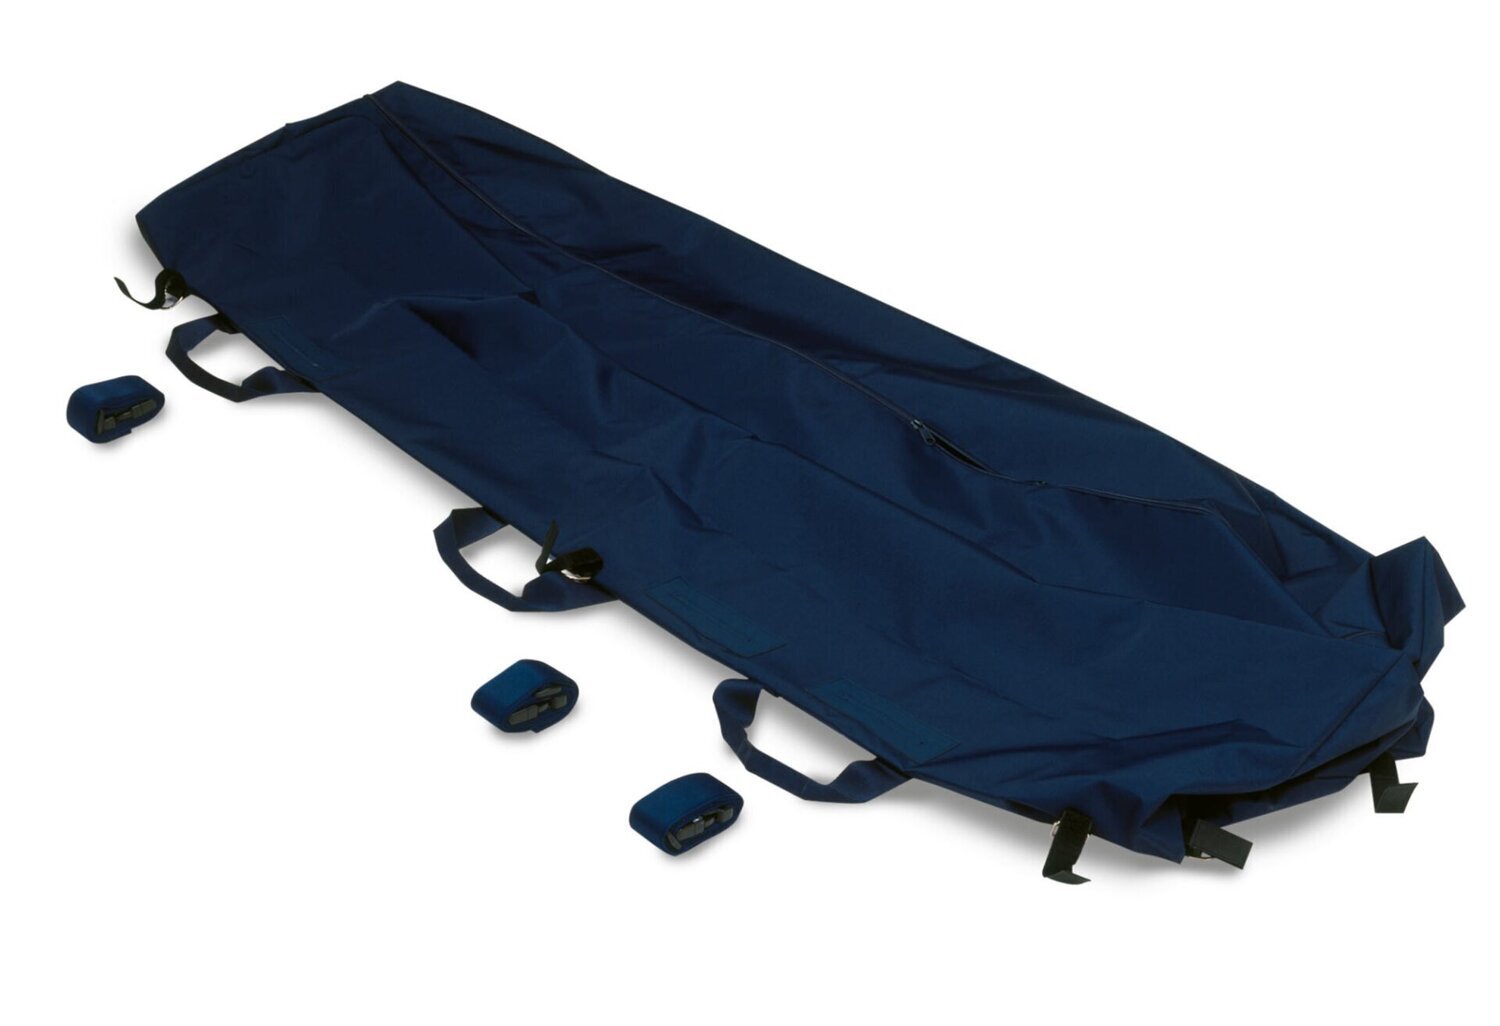 Body recovery bag for stretcher